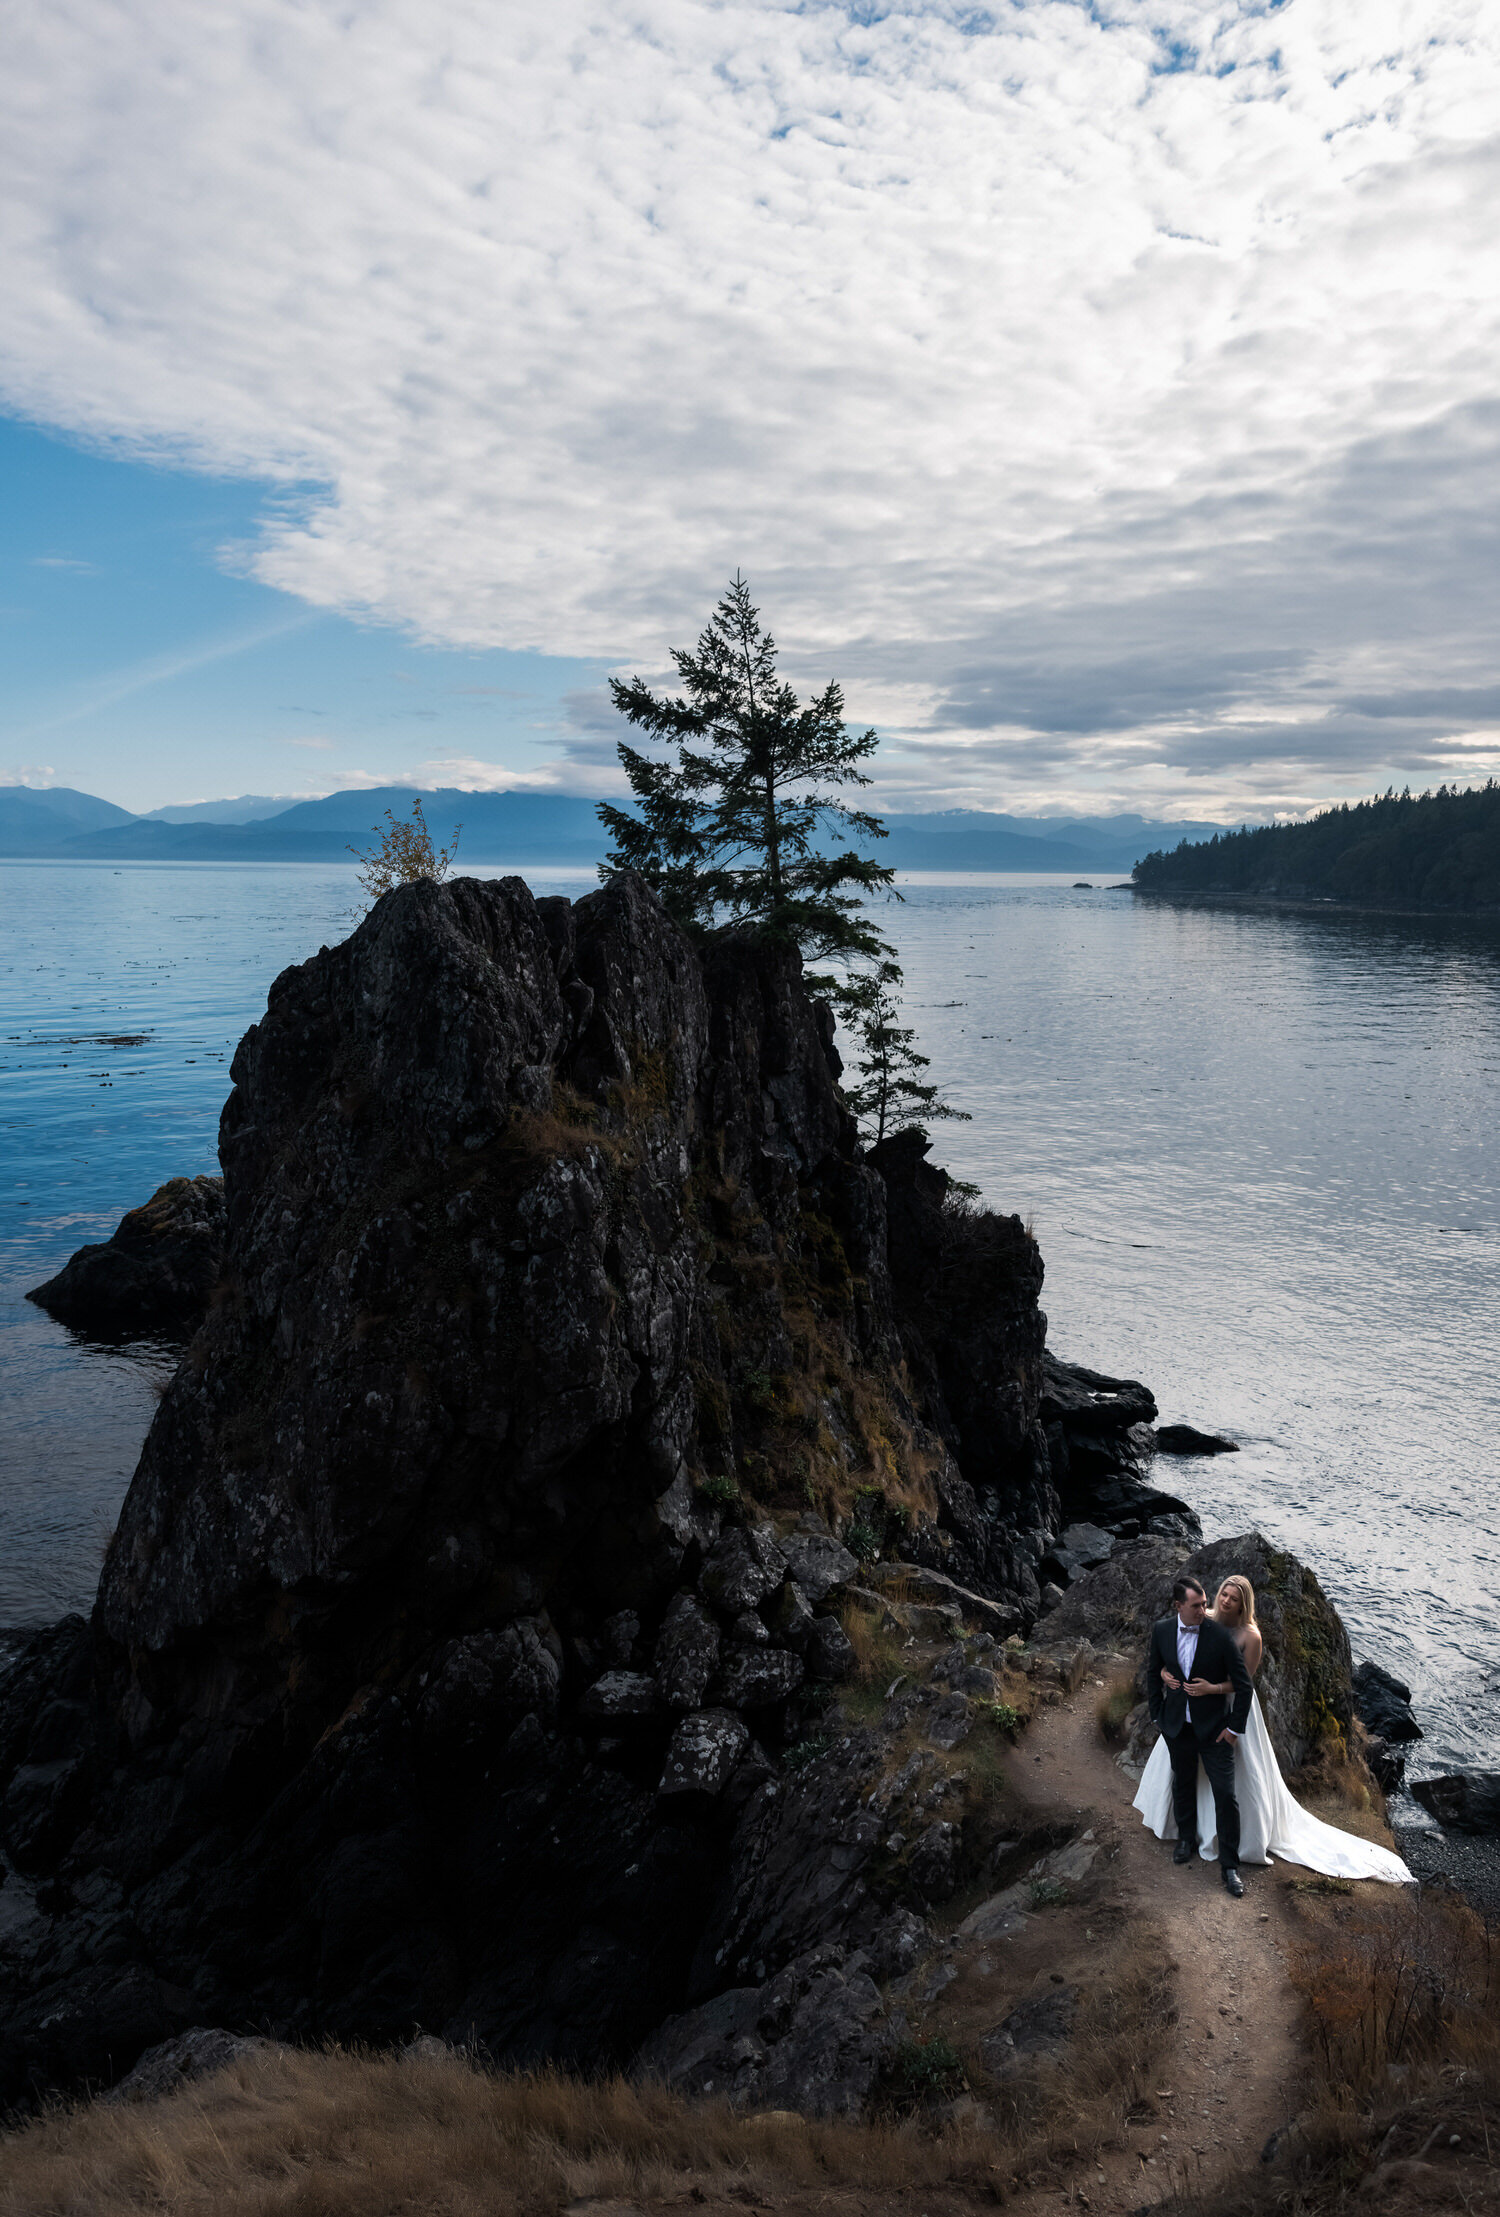 Vancouver Island Adventure Elopement and Small Wedding Photographer - Allie Knull's Photography-22.jpg